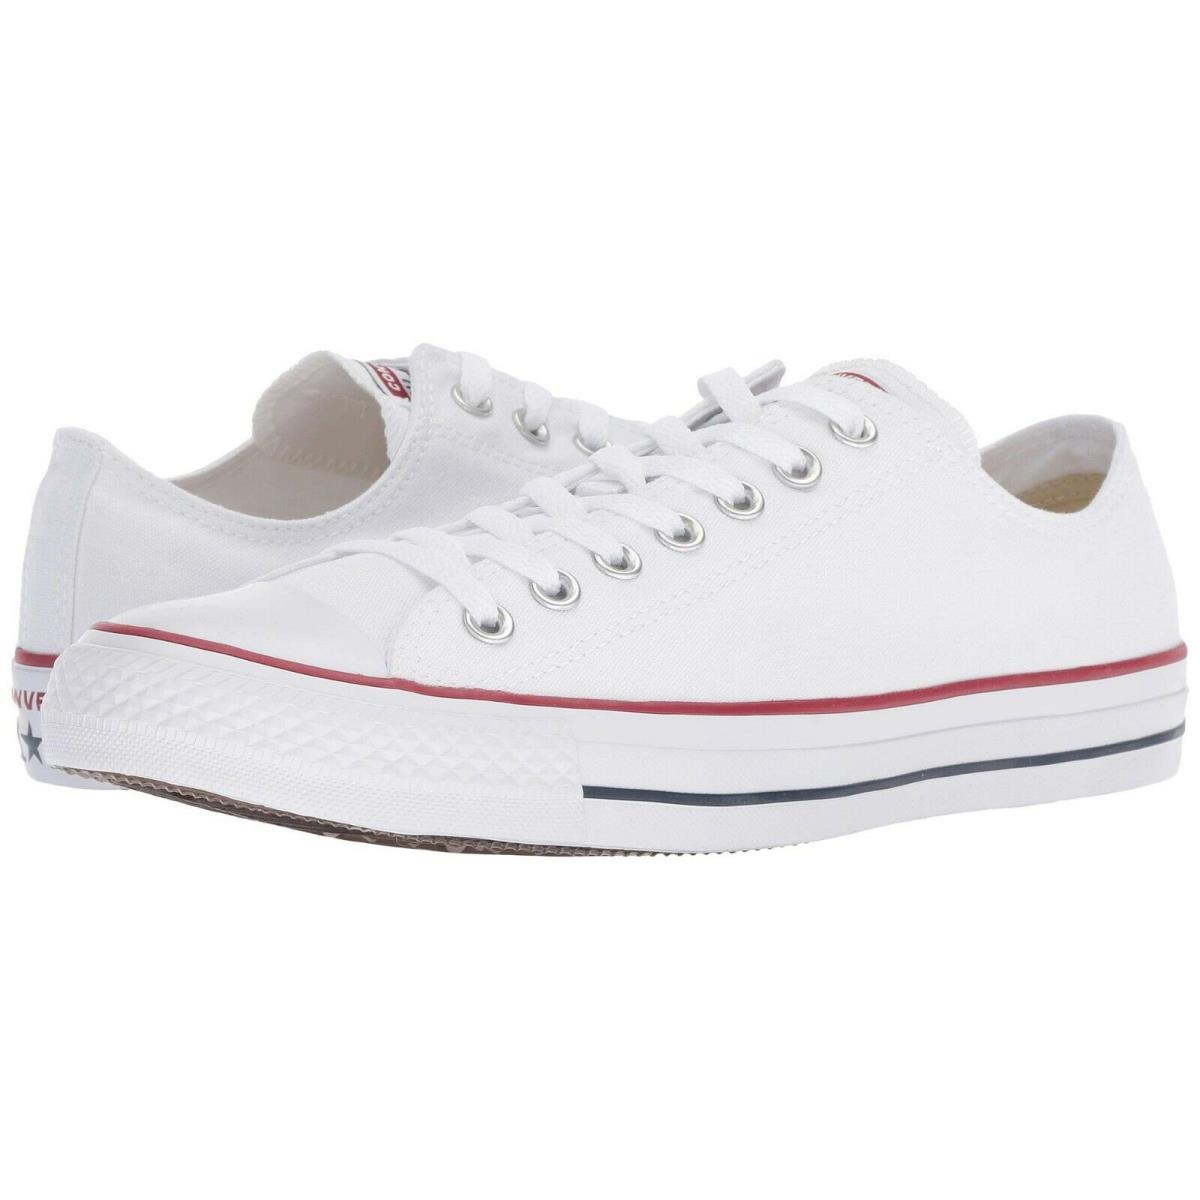 Converse Unisex Chuck Taylor All Star Low Top Shoes Optical White M7652 / M7652C - White